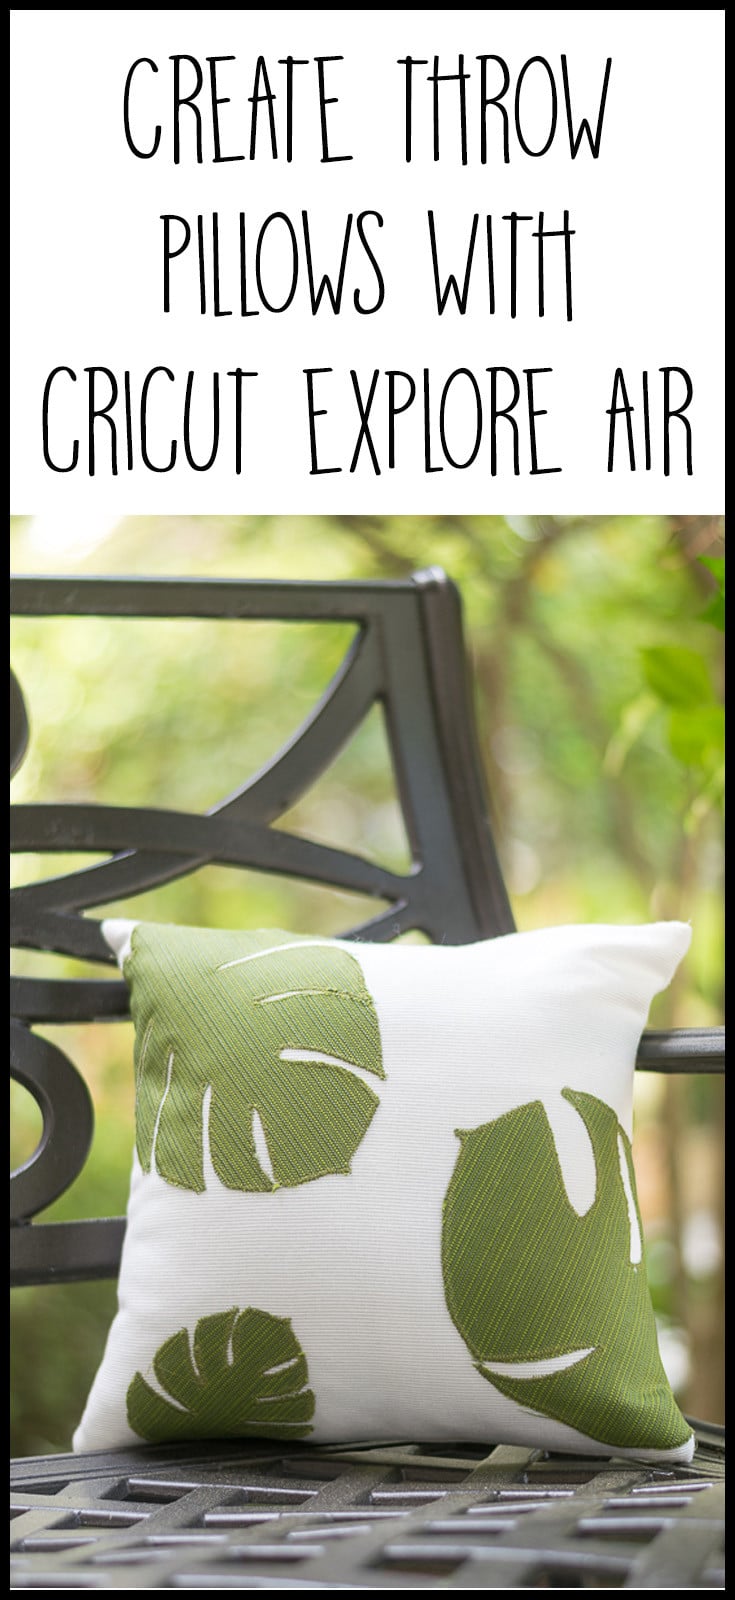 Love these throw pillows! Use a Cricut to cut the tropical leaf shapes and then just sew them on a white pillow cover. Use outdoor fabric for spring and summer porch decor or regular fabric for your home decor. #cricutmade @officialcricut (sponsored by Cricut)